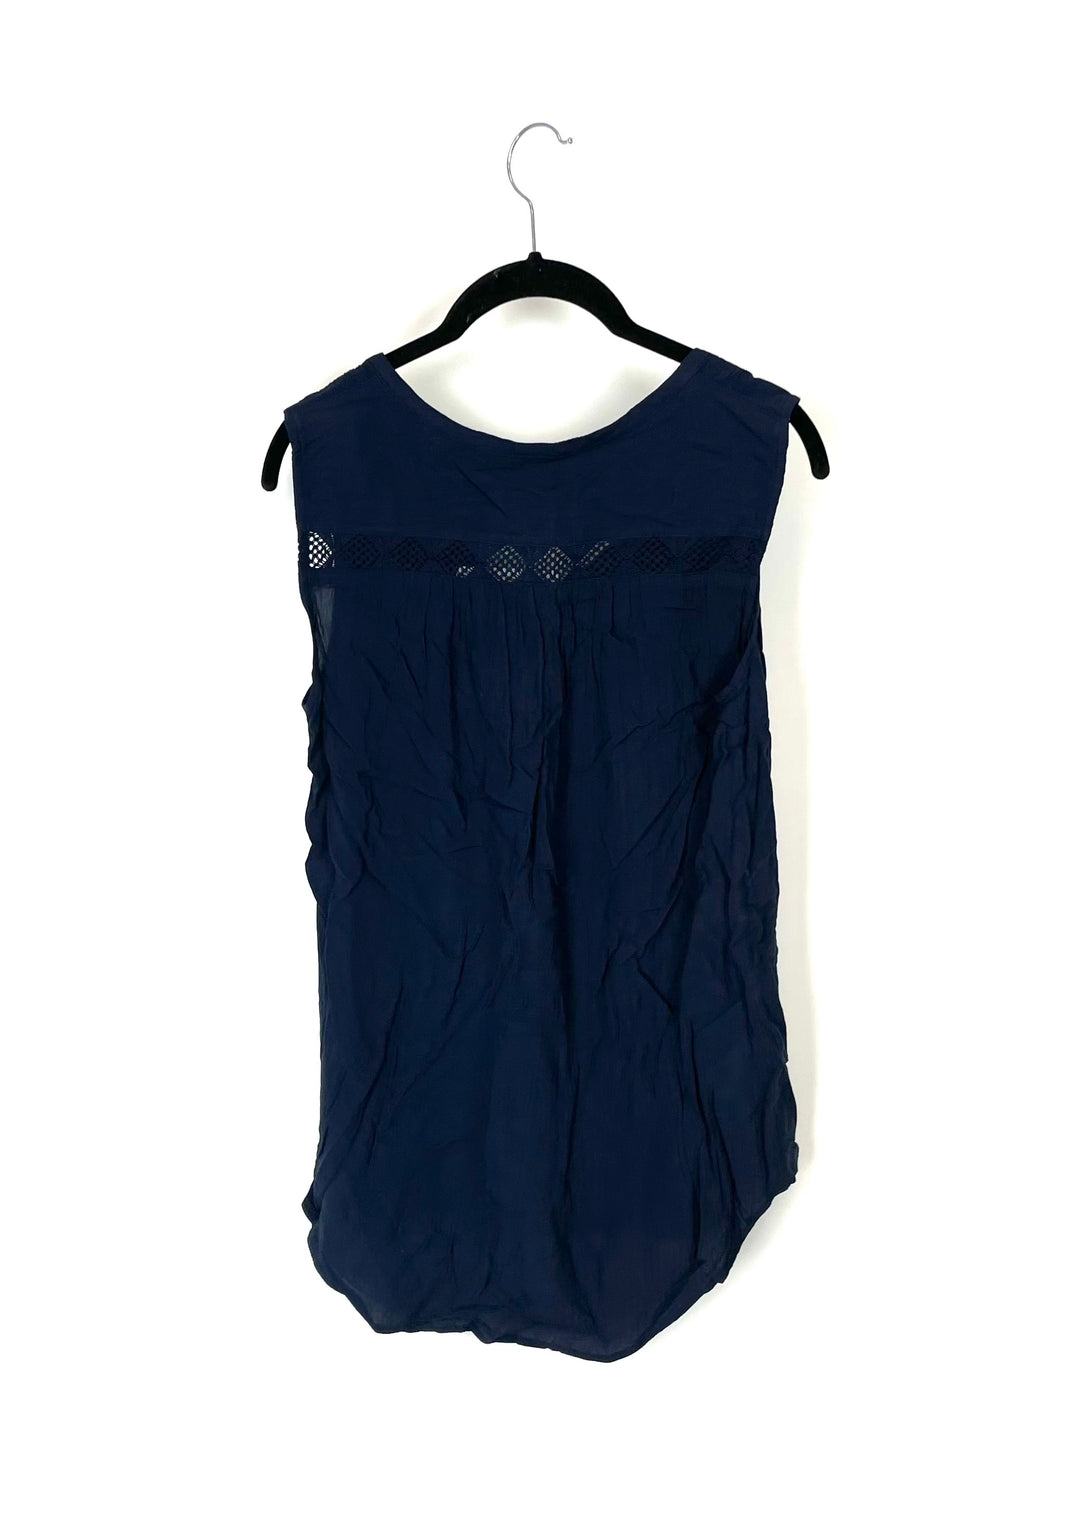 Navy Blue Blouse - Small